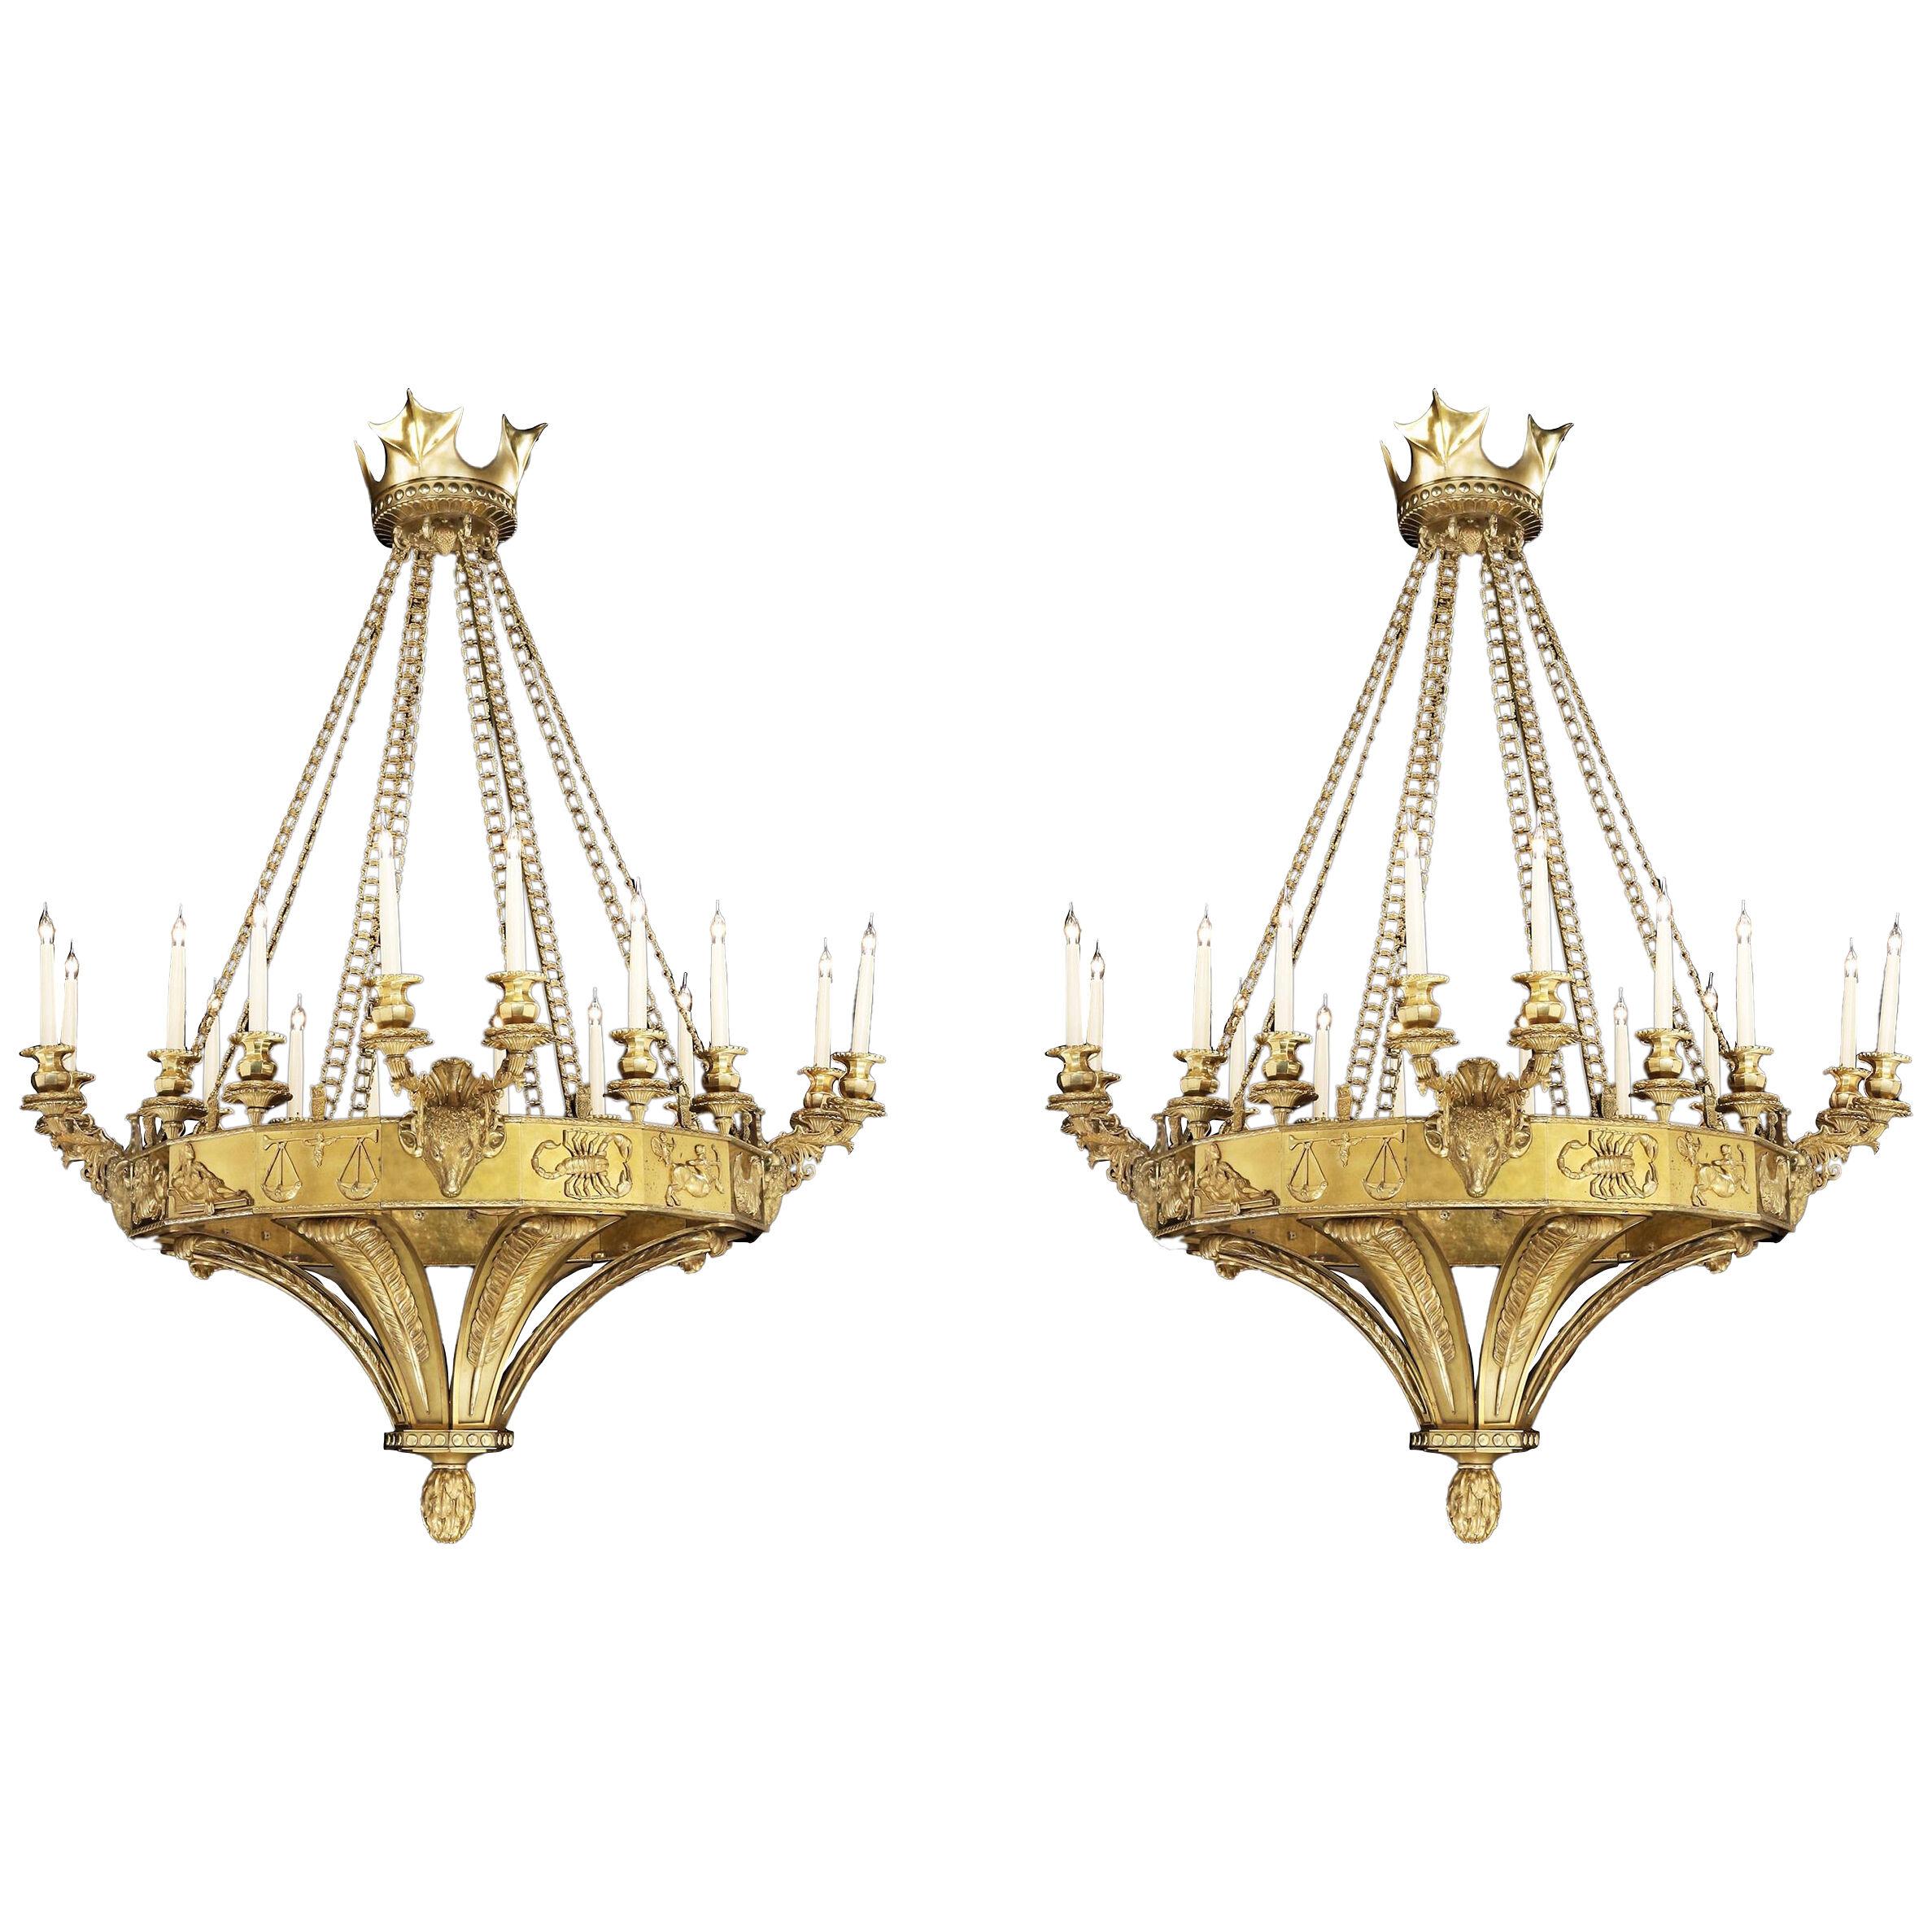 Rare Pair of 16-Light Chandeliers in the Gothic Revival Style